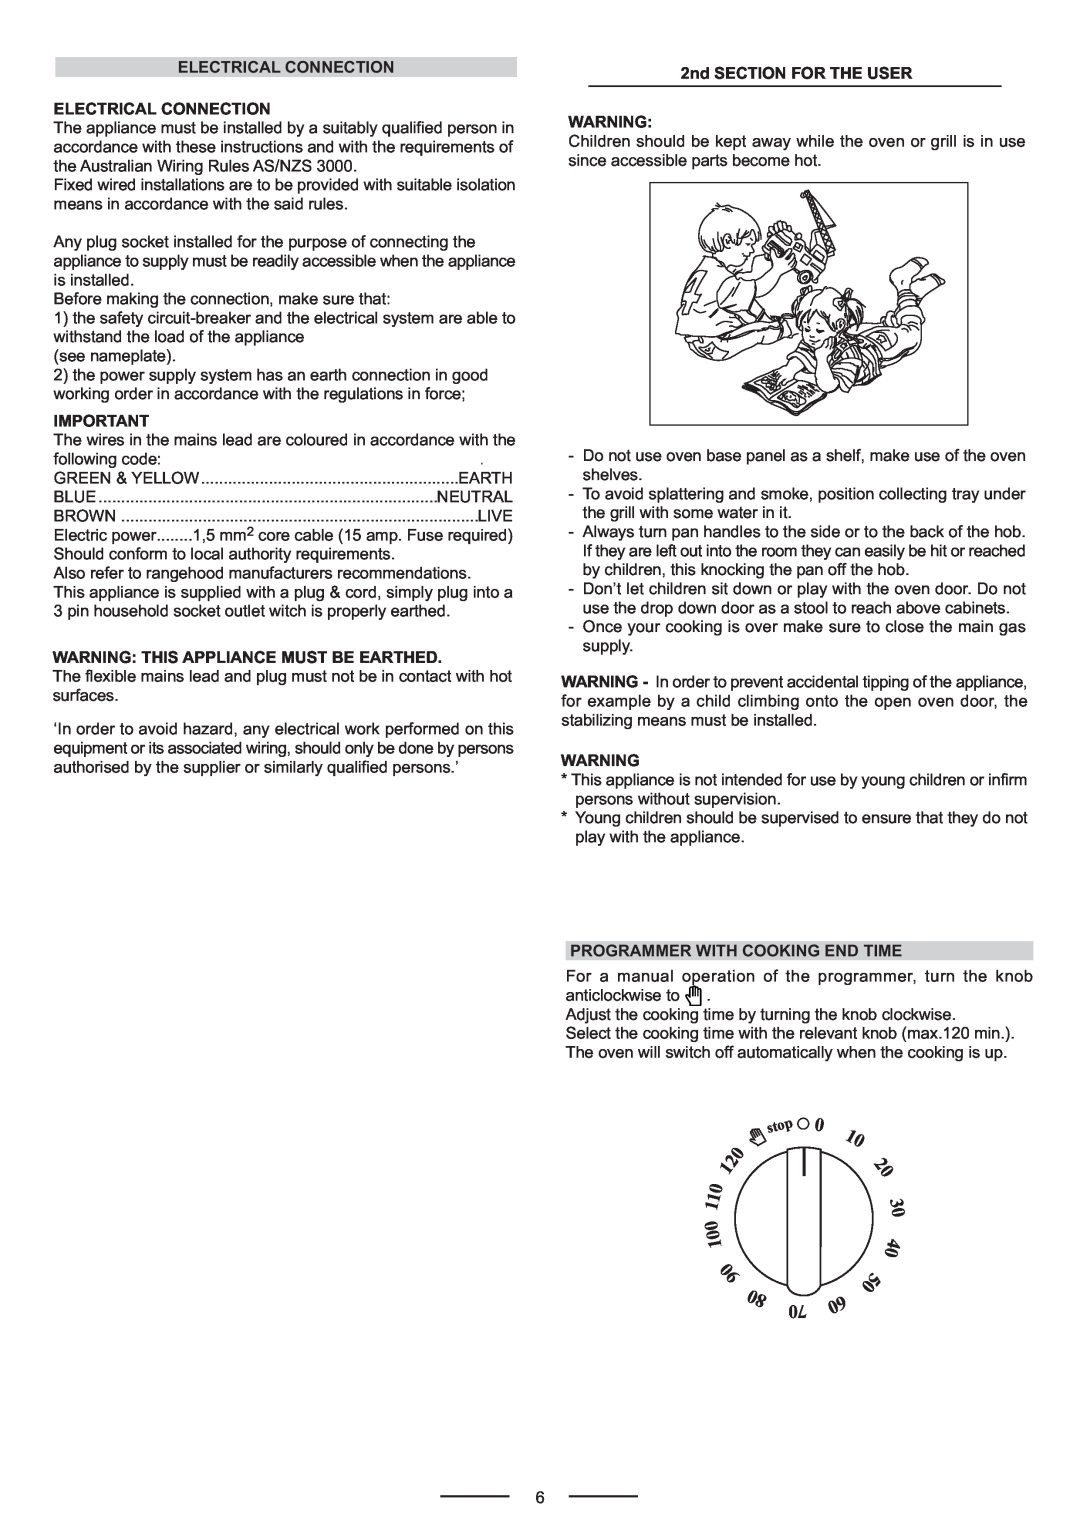 Whirlpool ACG902IX manual Electrical Connection Electrical Connection, Warning This Appliance Must Be Earthed 